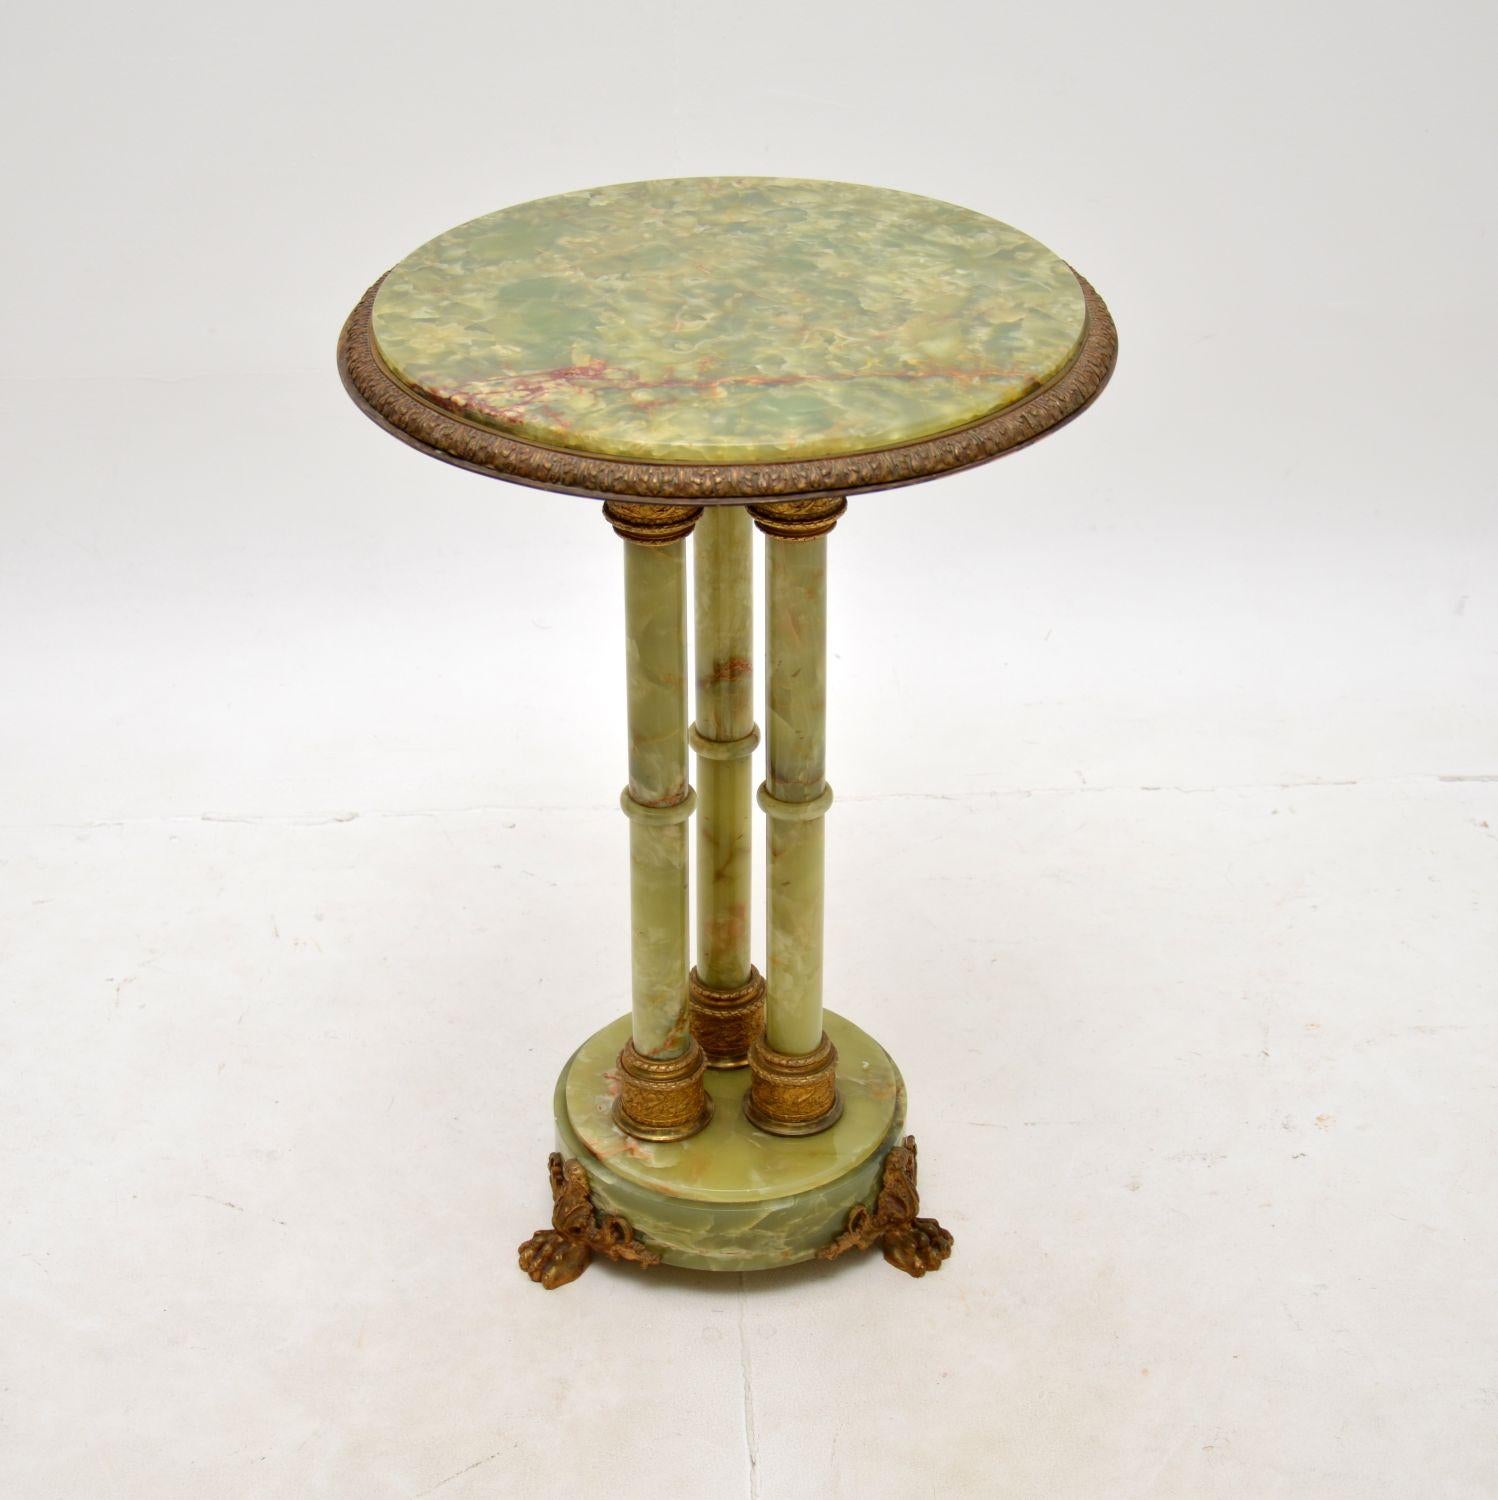 A magnificent antique French onyx and gilt metal occasional side table. This was made in France, it dates from around the 1900-1910 period.

It is of superb quality, beautifully constructed and it is a very useful size. This is predominantly solid